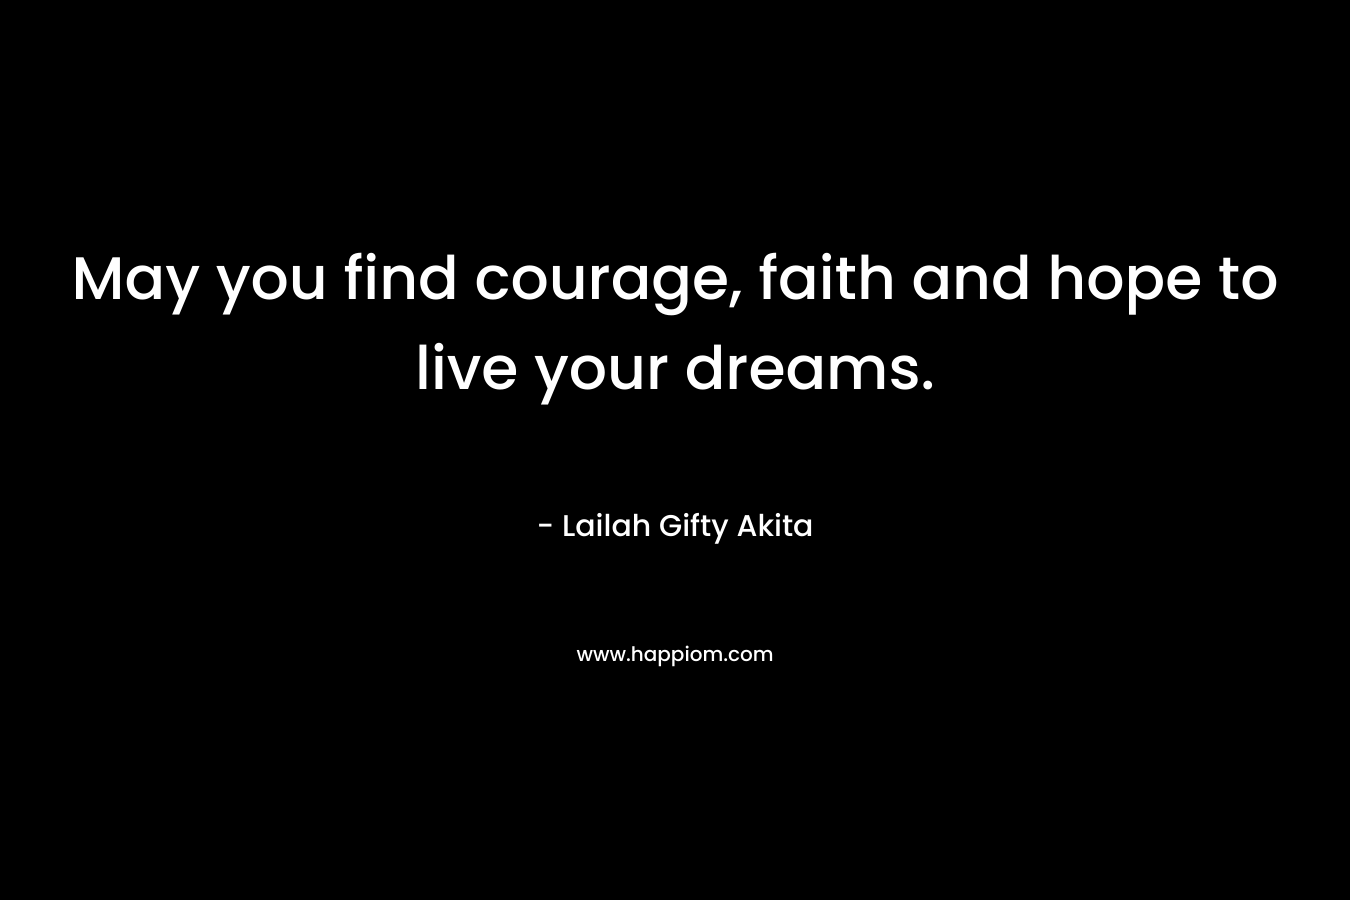 May you find courage, faith and hope to live your dreams.